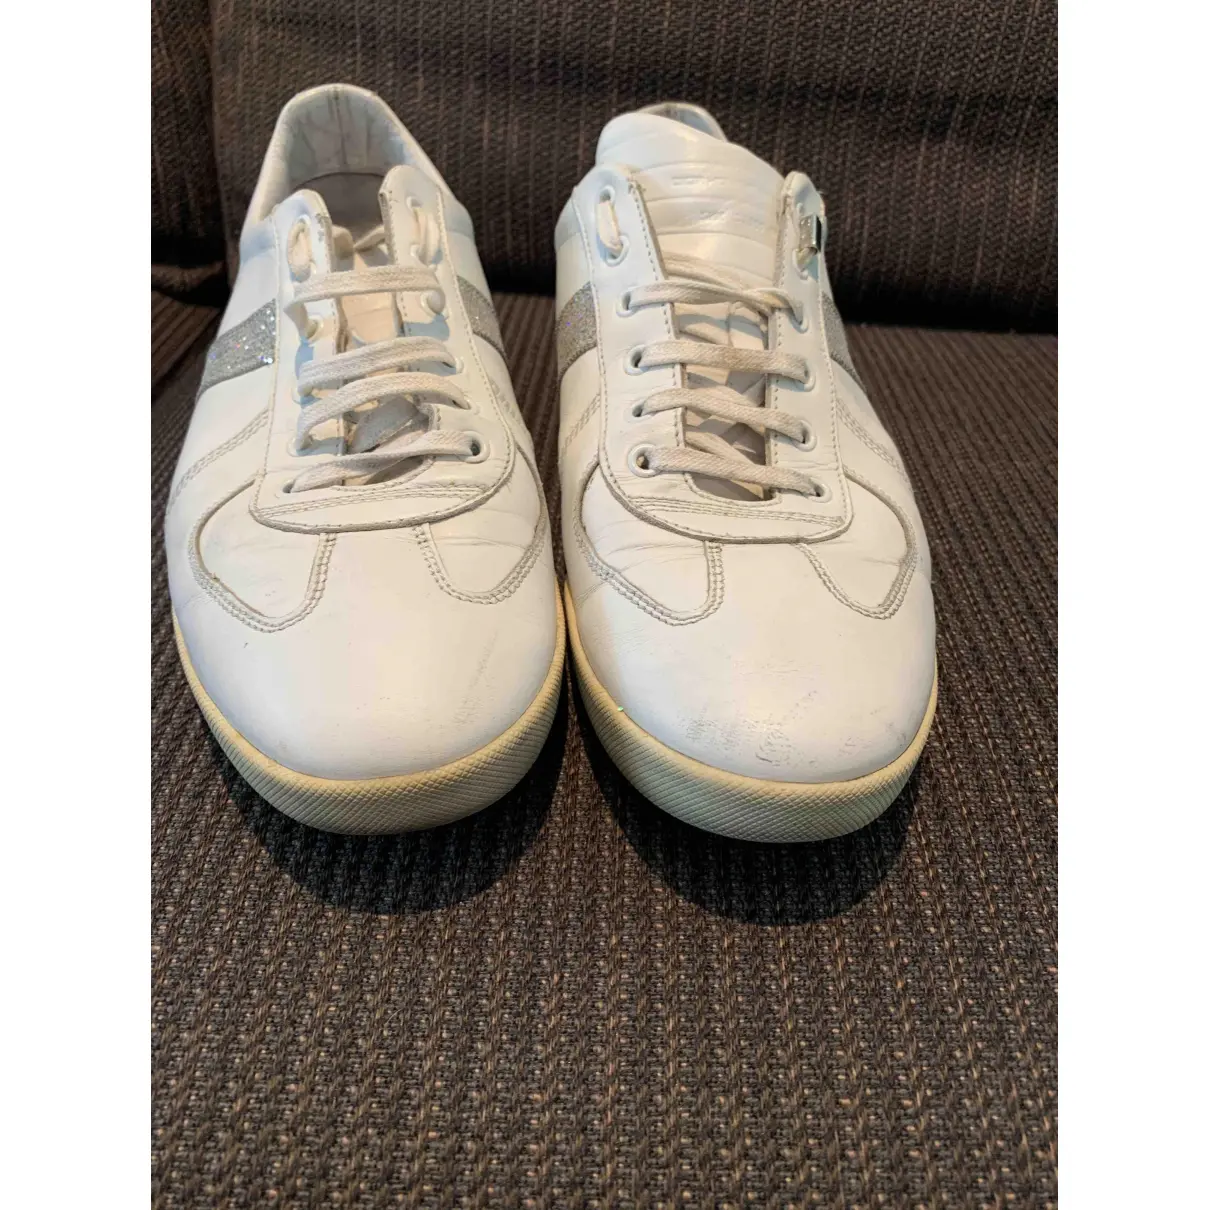 Buy Dior Homme B01 leather low trainers online